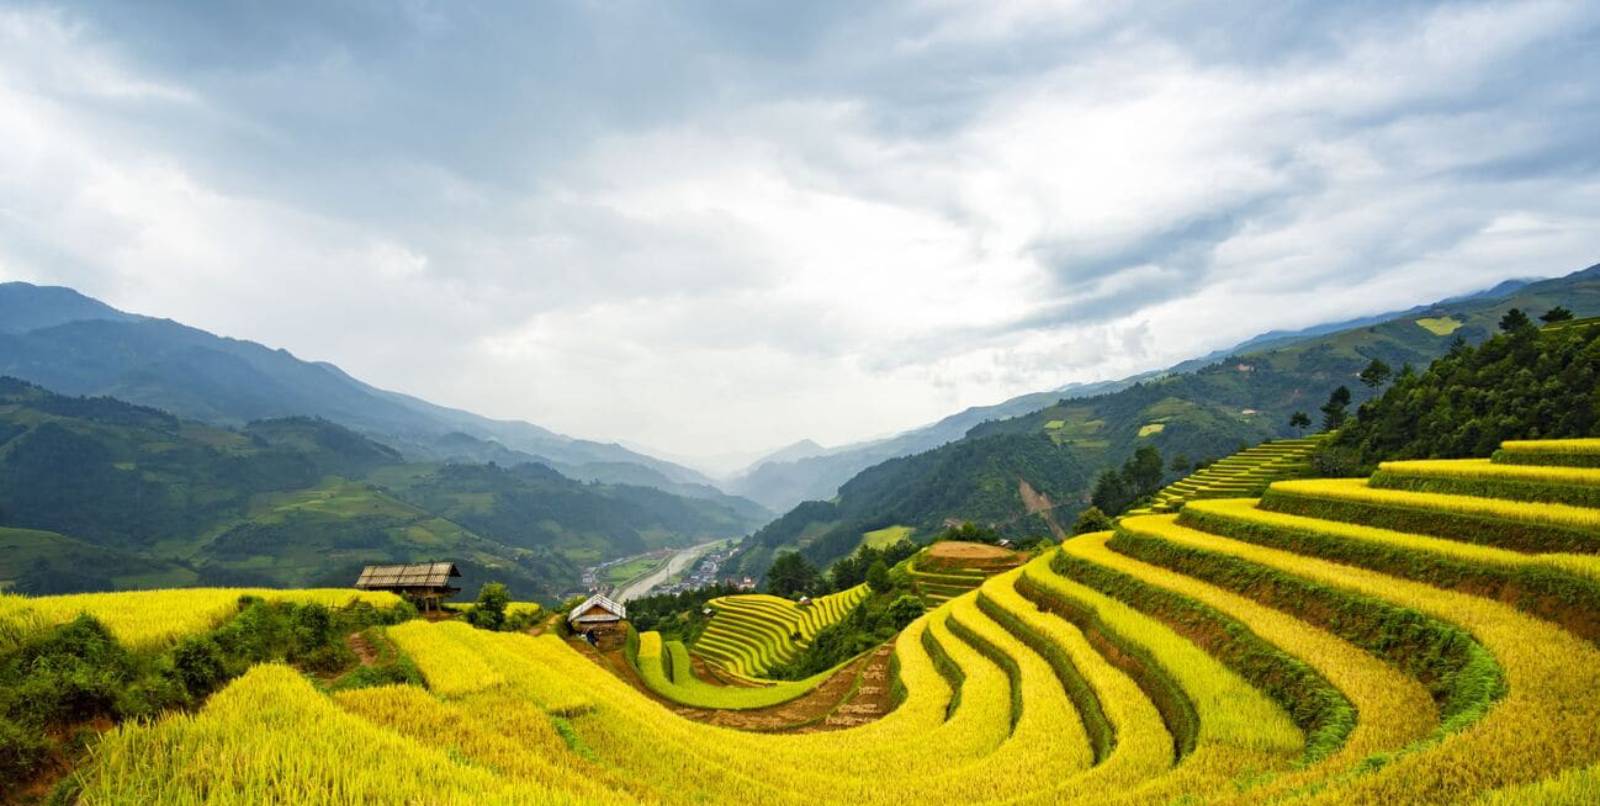 Lim Mong Valley in Mu Cang Chai